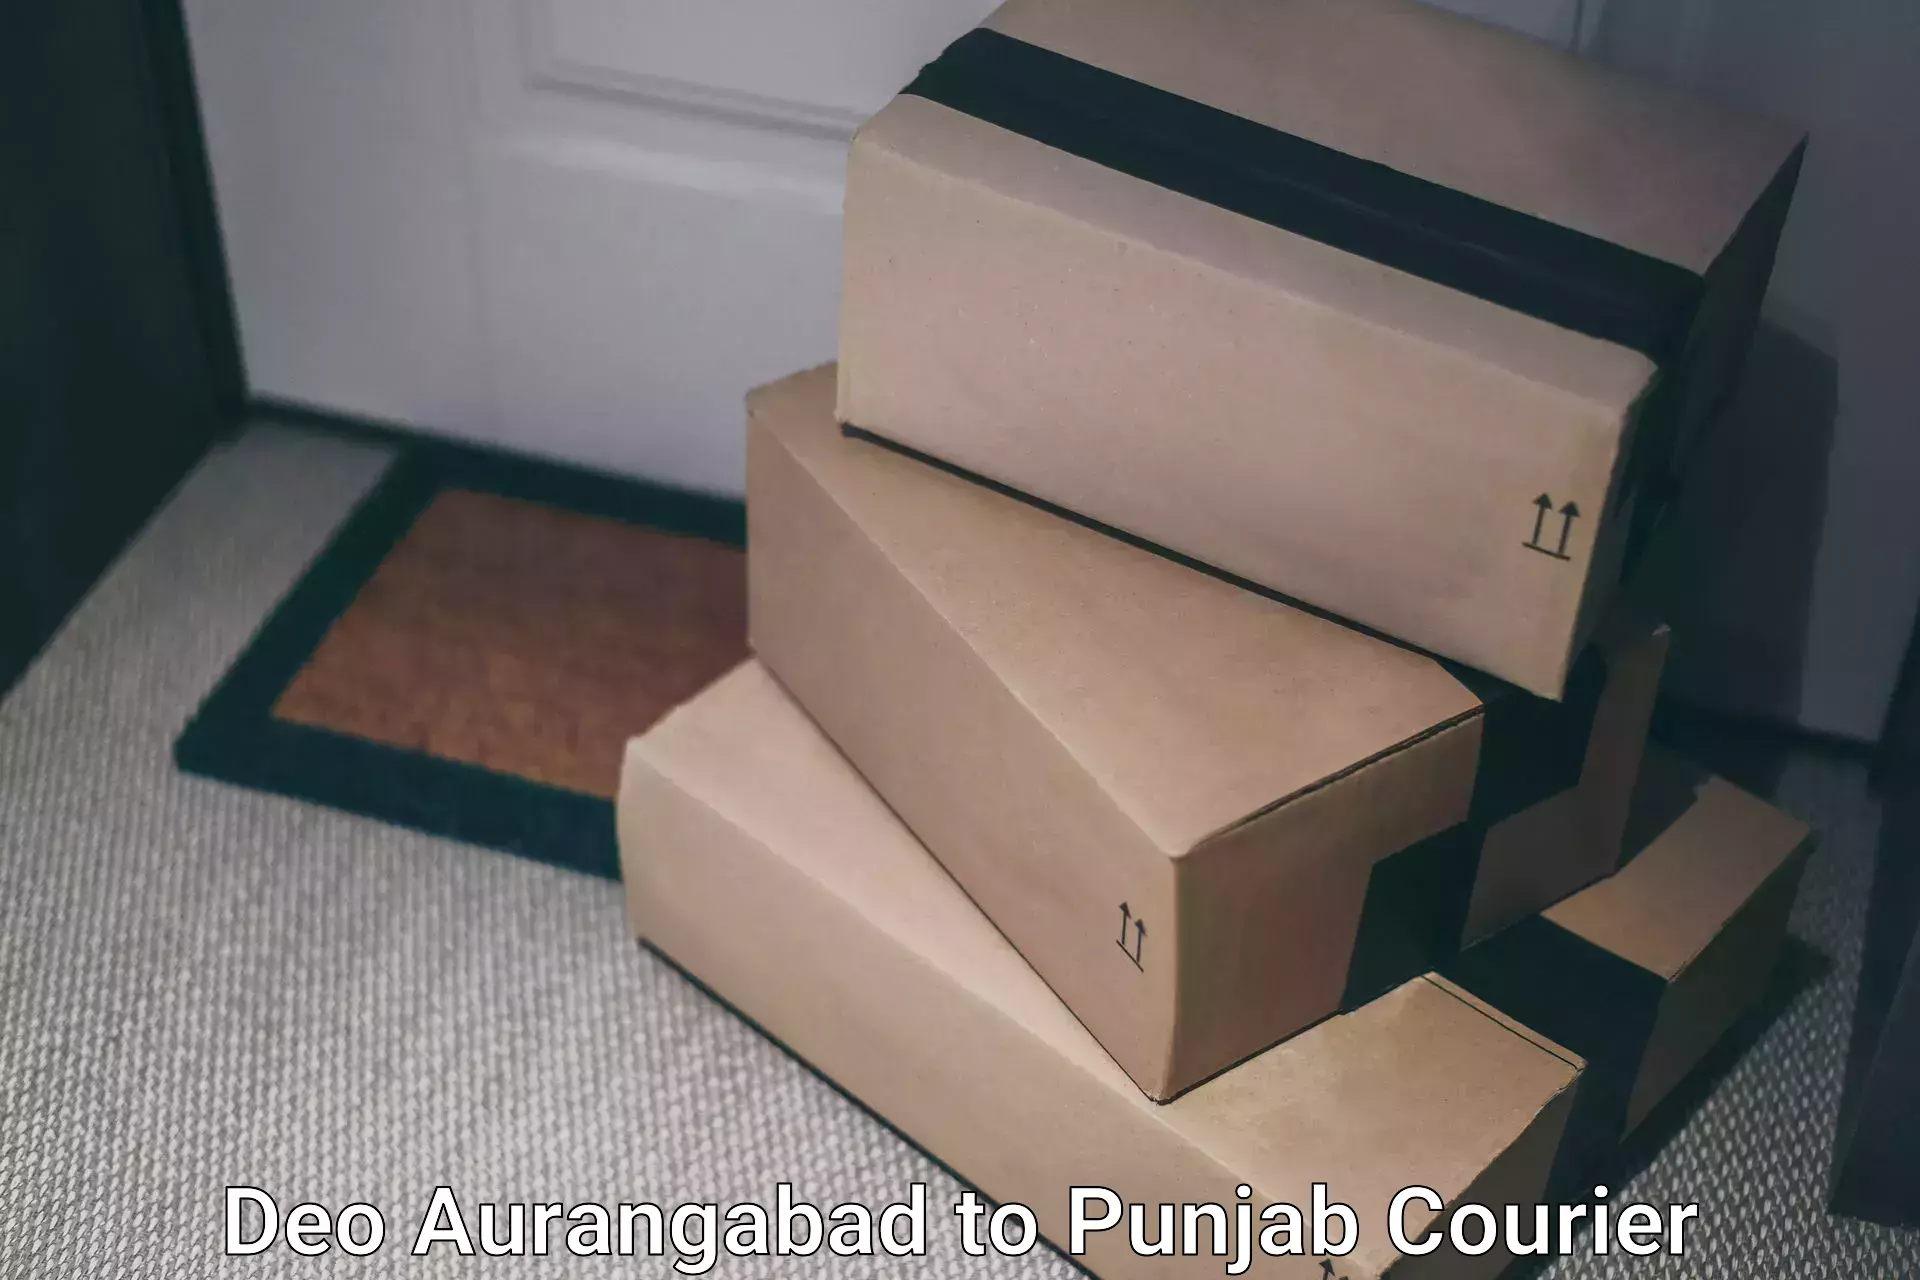 Budget-friendly shipping Deo Aurangabad to Mohali